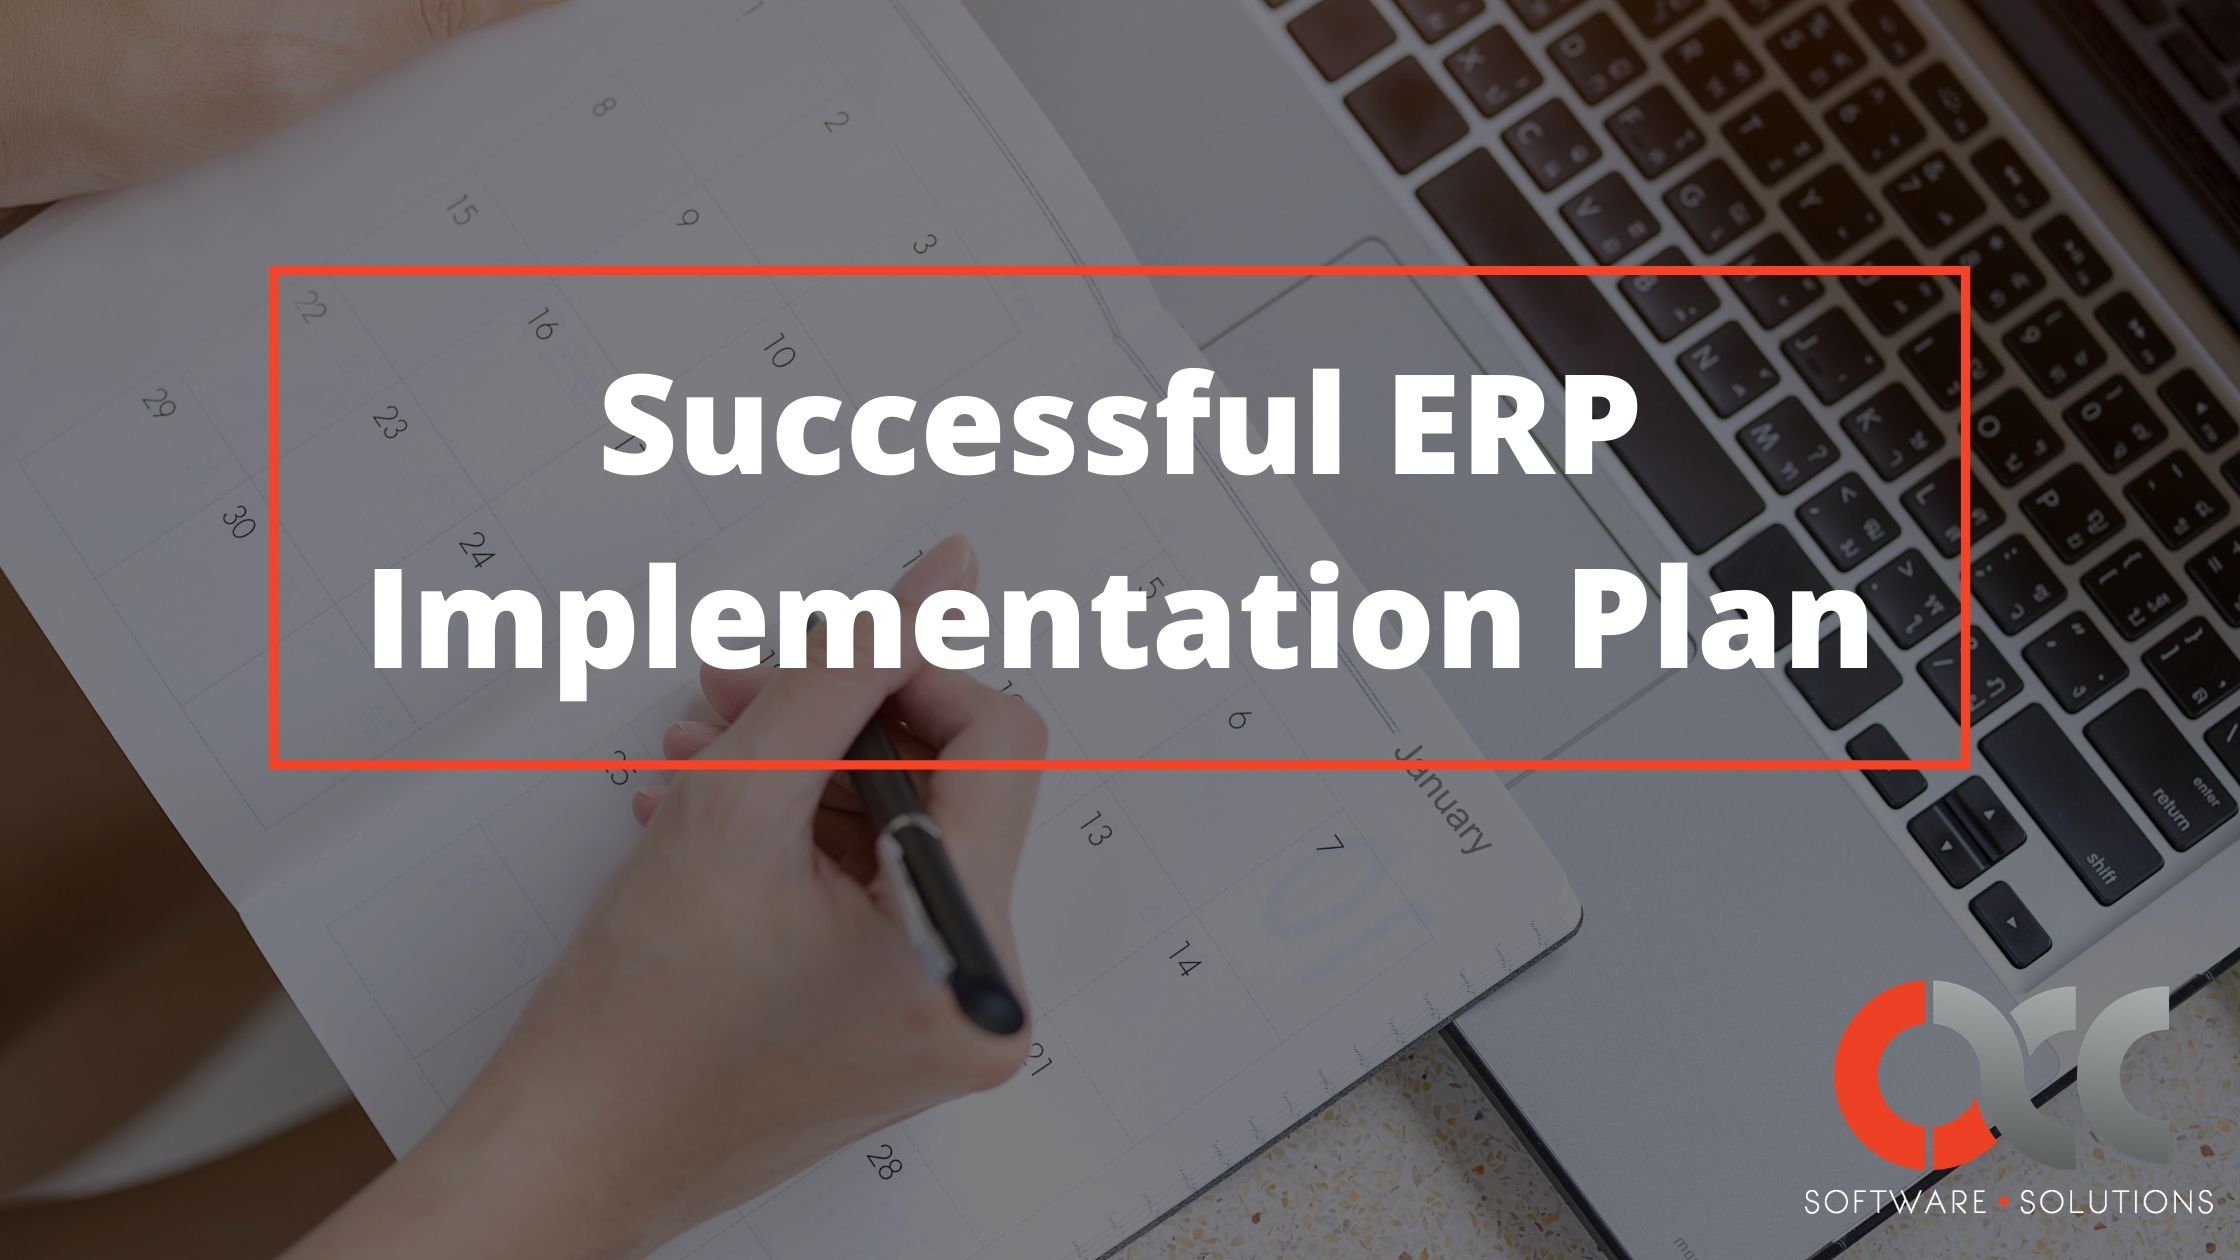 Successful ERP Implementation Plan | ACC Software Solutions